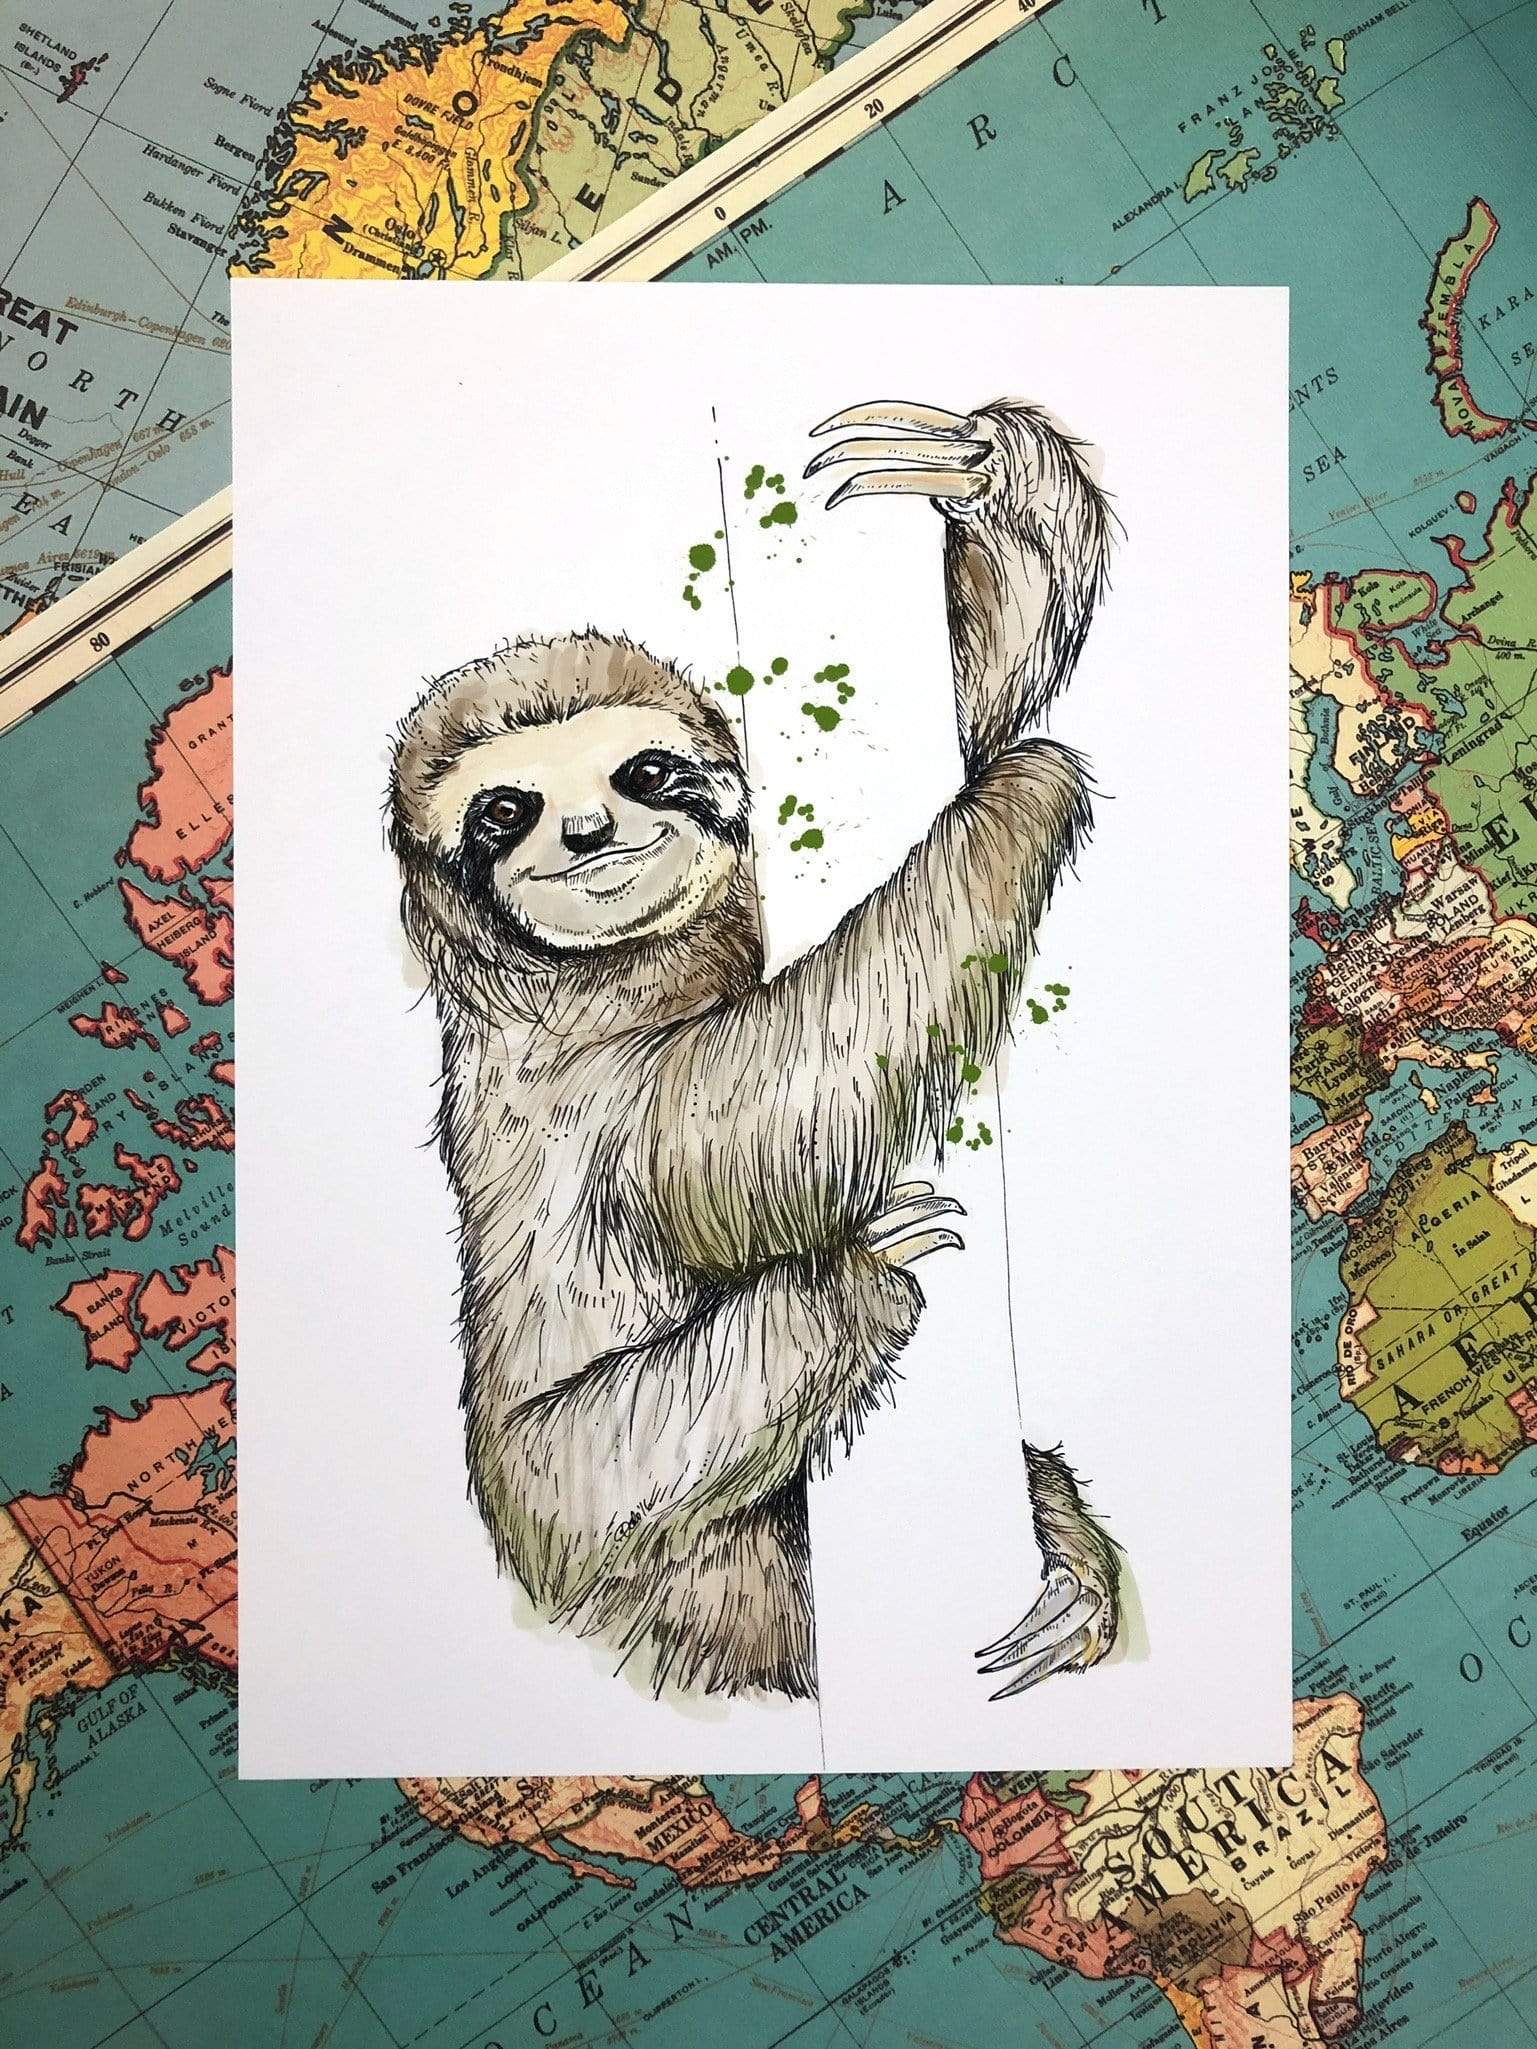 This image contains Sloth,Illustration,Three-toed sloth,Art,,